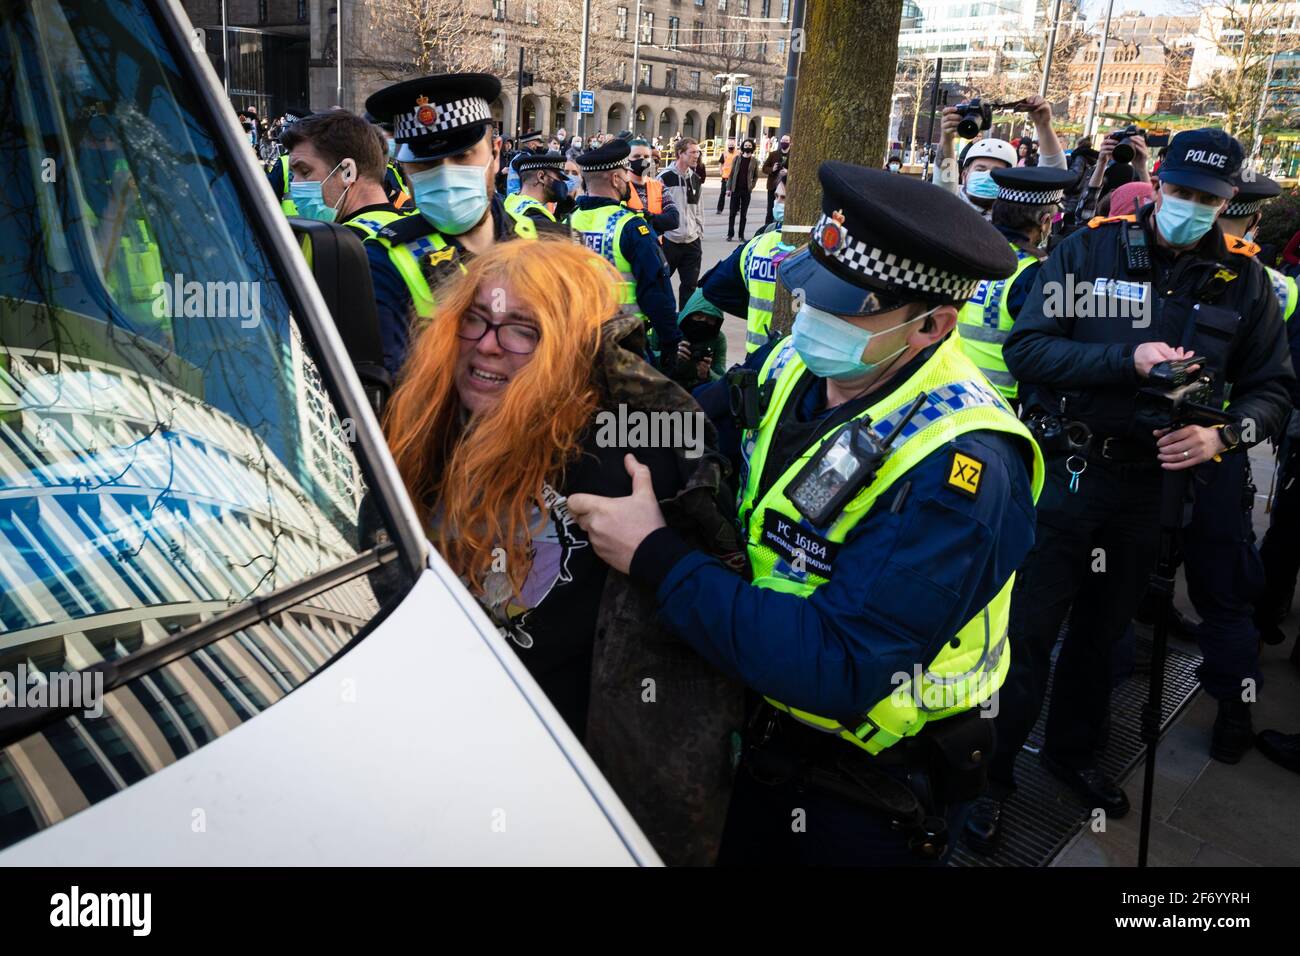 Manchester, UK. 03rd Apr, 2021. A women is detained by police during a ÔKill The BillÕ demonstration. Protests continue throughout the country due to the proposed Police, Crime and Sentencing Bill that, if passed, would introduce new legislation around protesting. Credit: Andy Barton/Alamy Live News Stock Photo